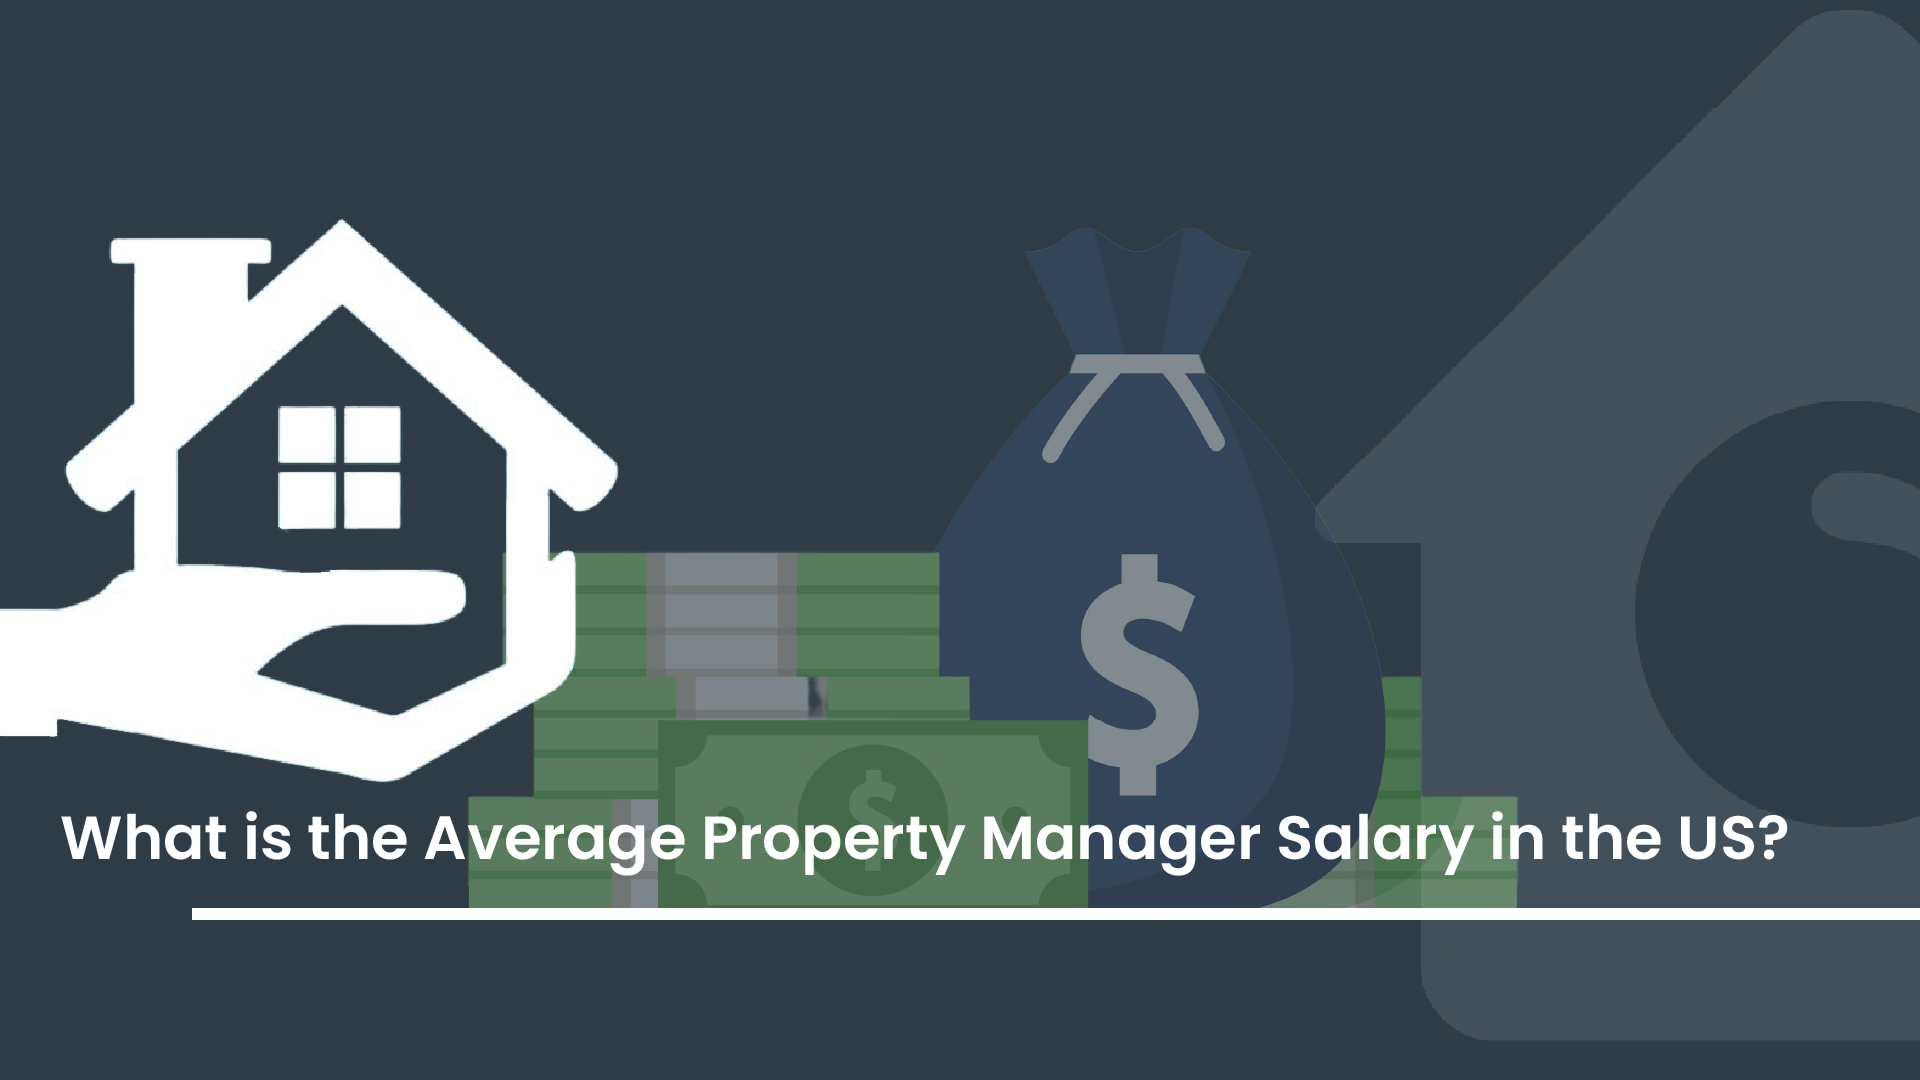 What is the Average Property Manager Salary in the US?